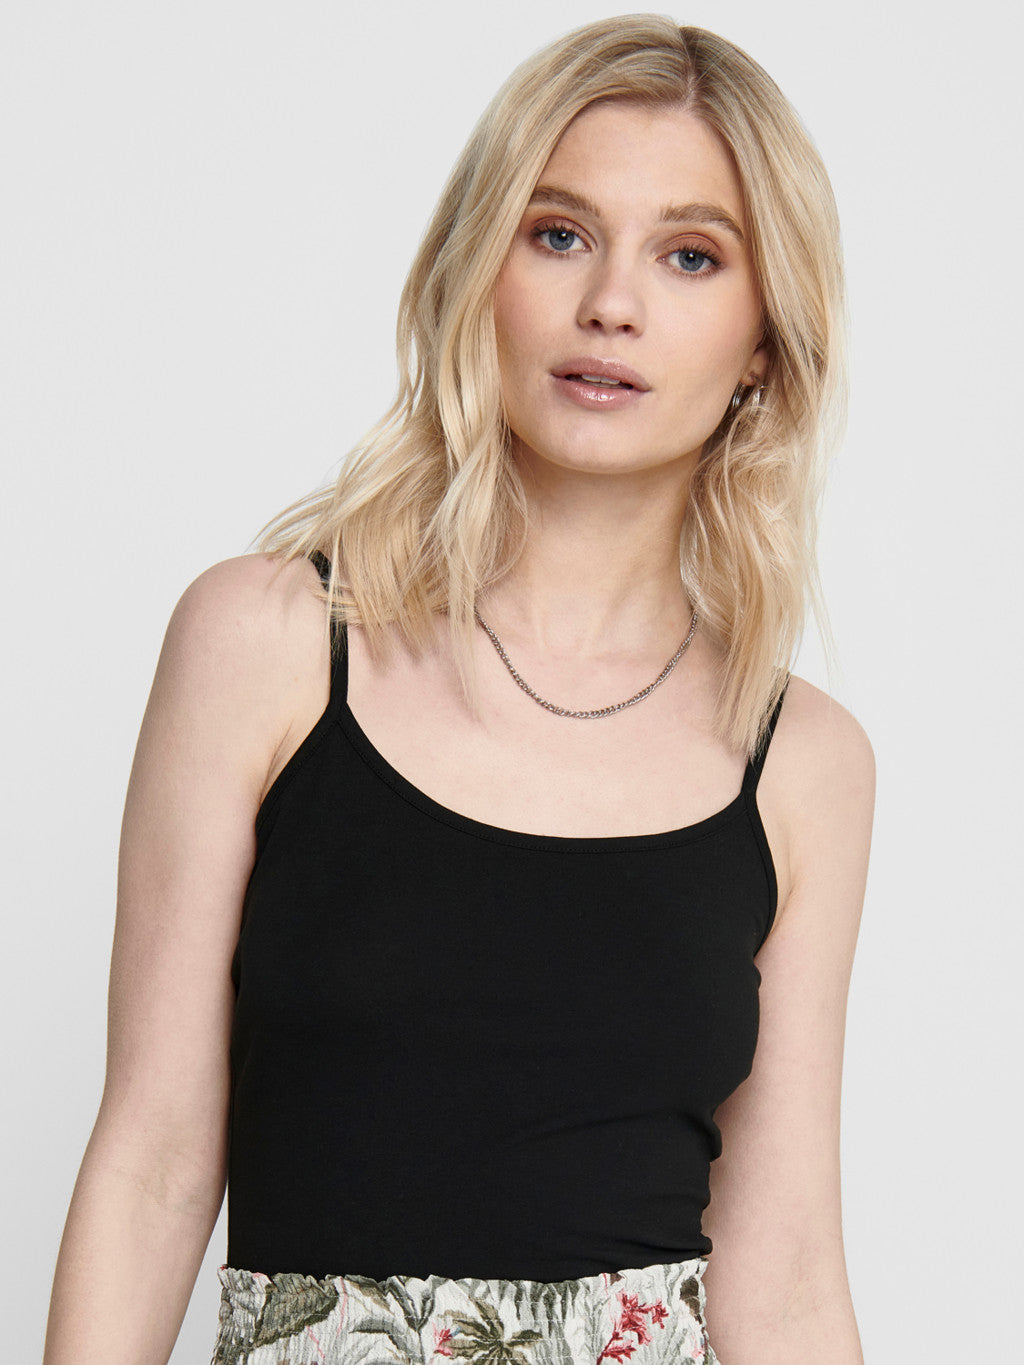 TLC NWT XL Women's Black Cami Tank Crop Top Shirt Spaghetti Straps - $9  (70% Off Retail) New With Tags - From Vintage